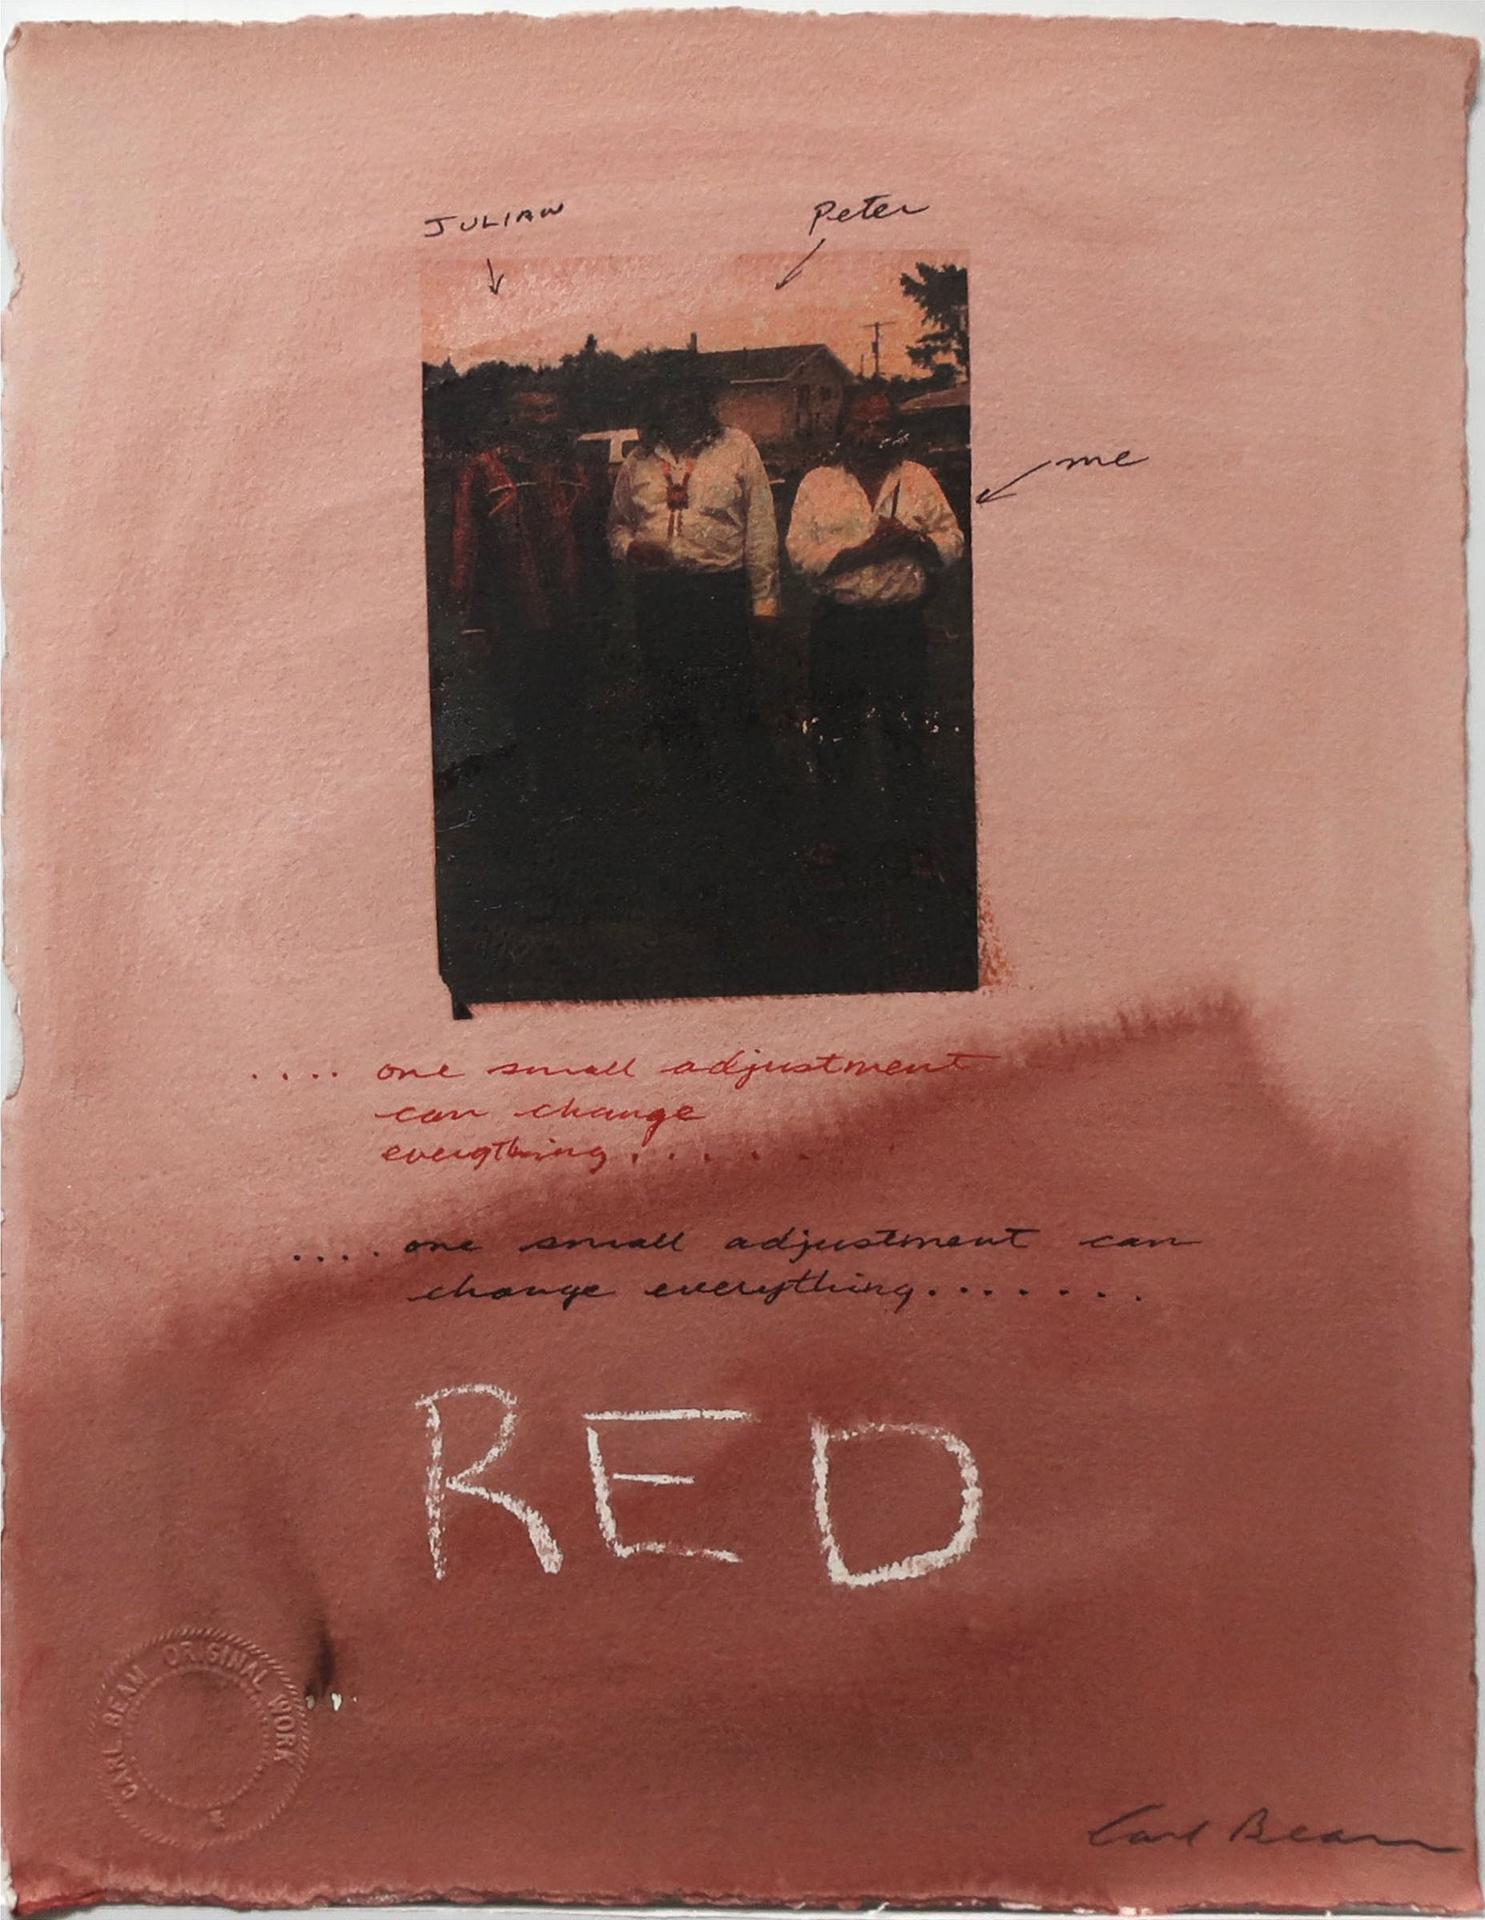 Carl Beam (1943-2005) - Red (One Small Adjustment Can Change Everything)